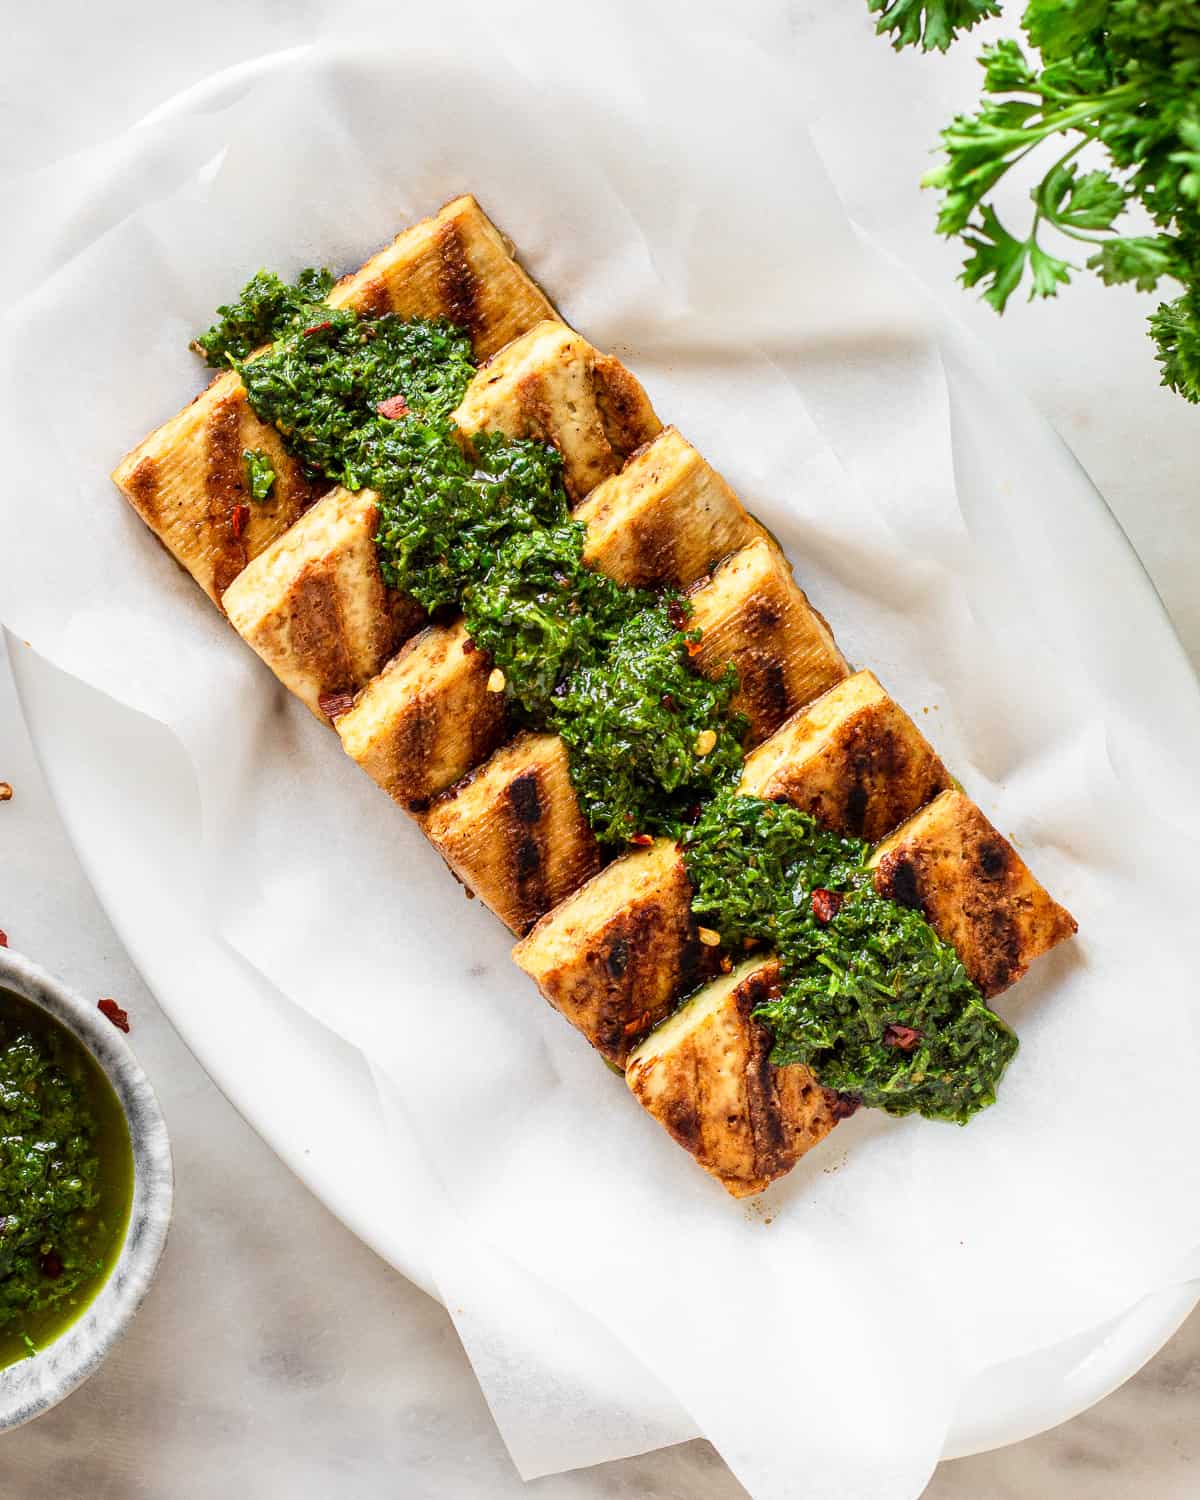 Six pieces of tofu with grill marks and chimichurri on top.